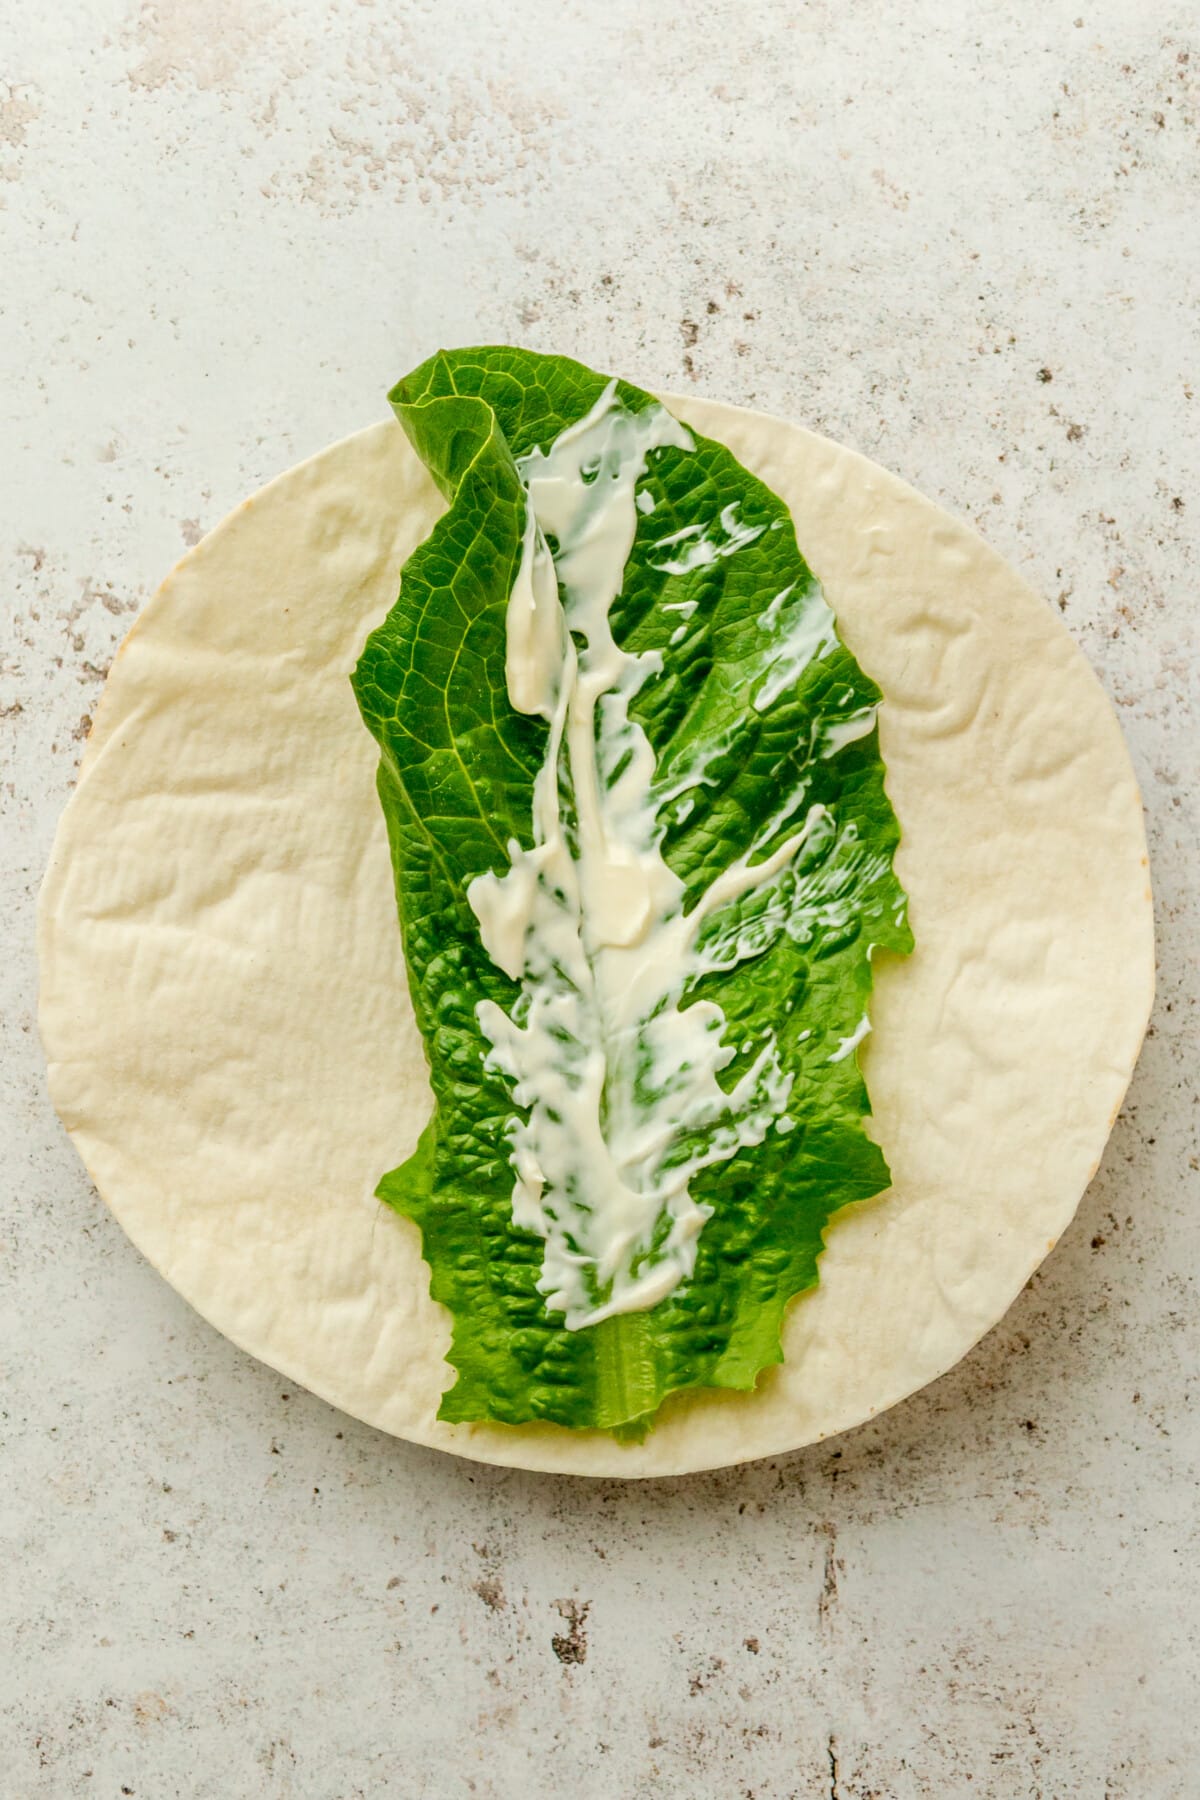 A wrap with a romaine leaf and mayo sit on a light grey surface.